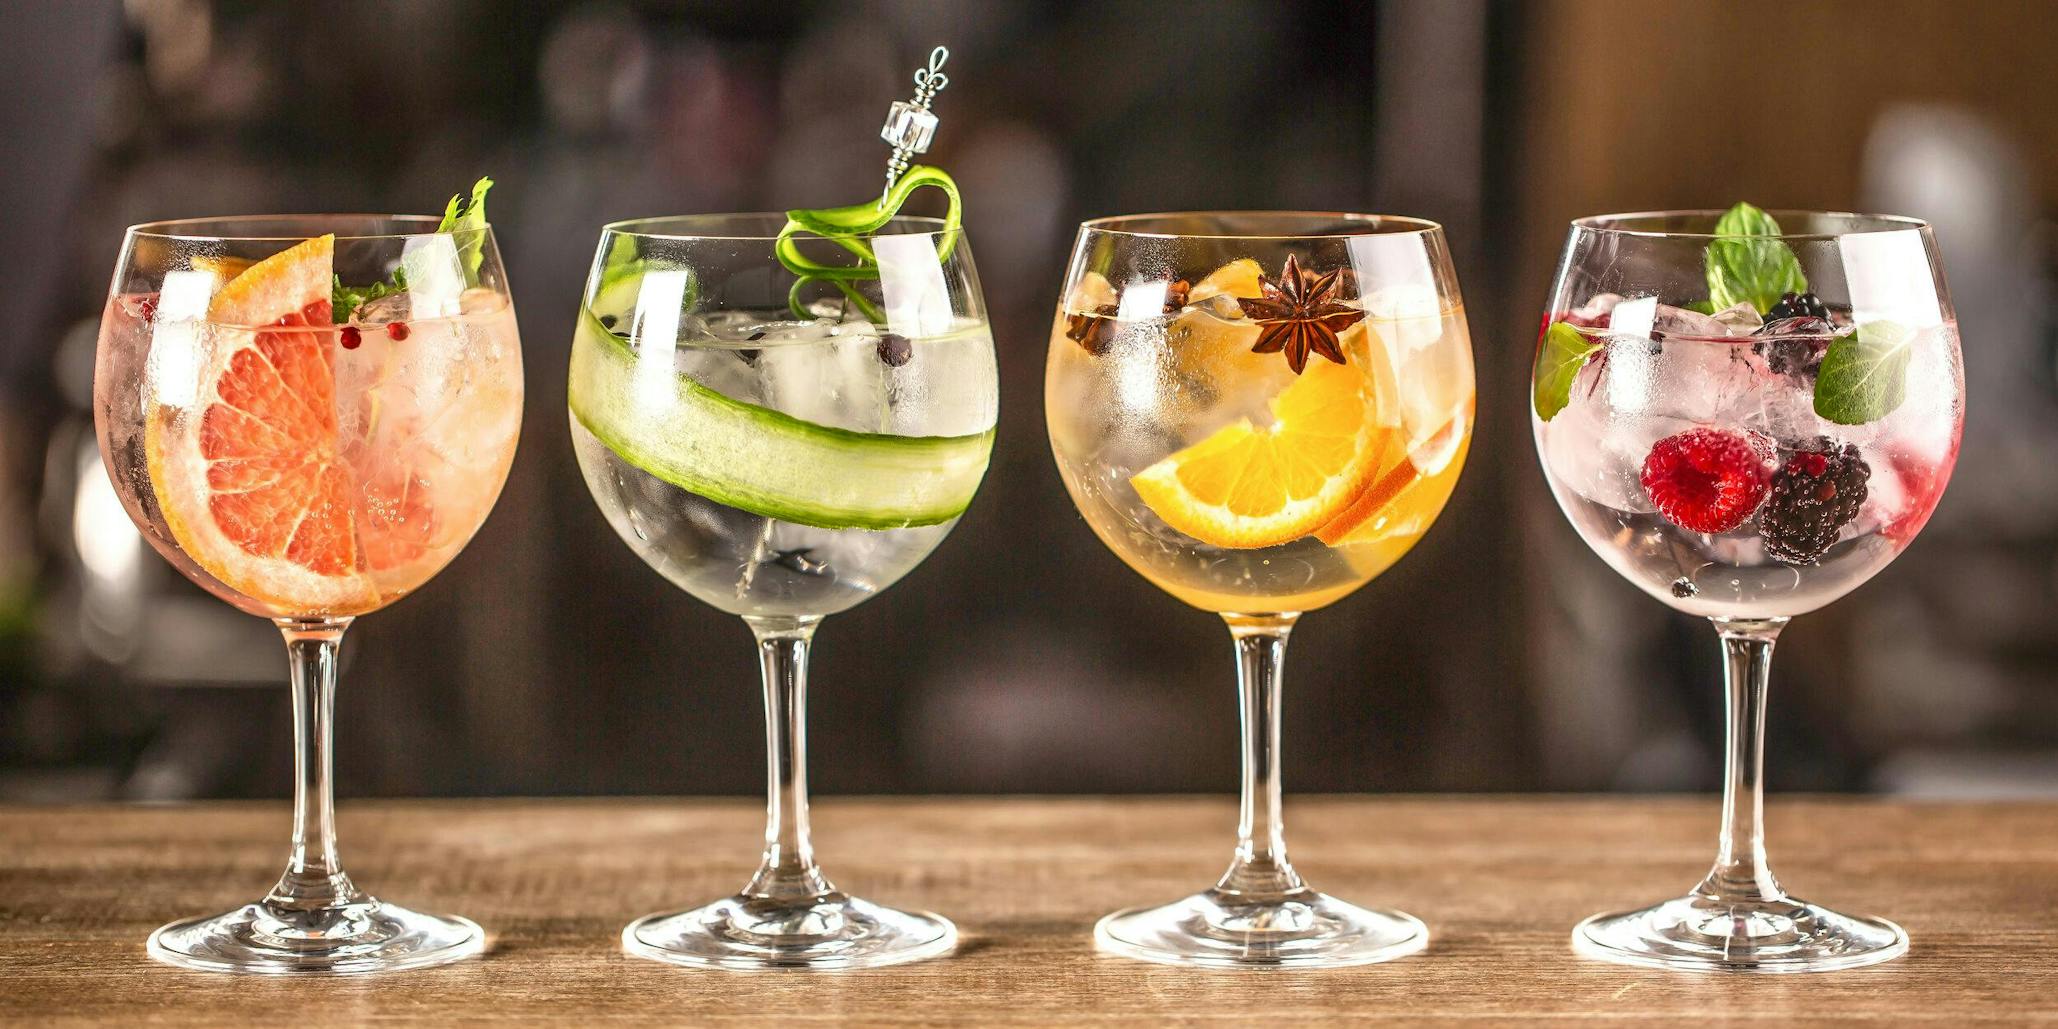 The ultimate gin garnish guide! Find the perfect garnish to pair with every kind of gin